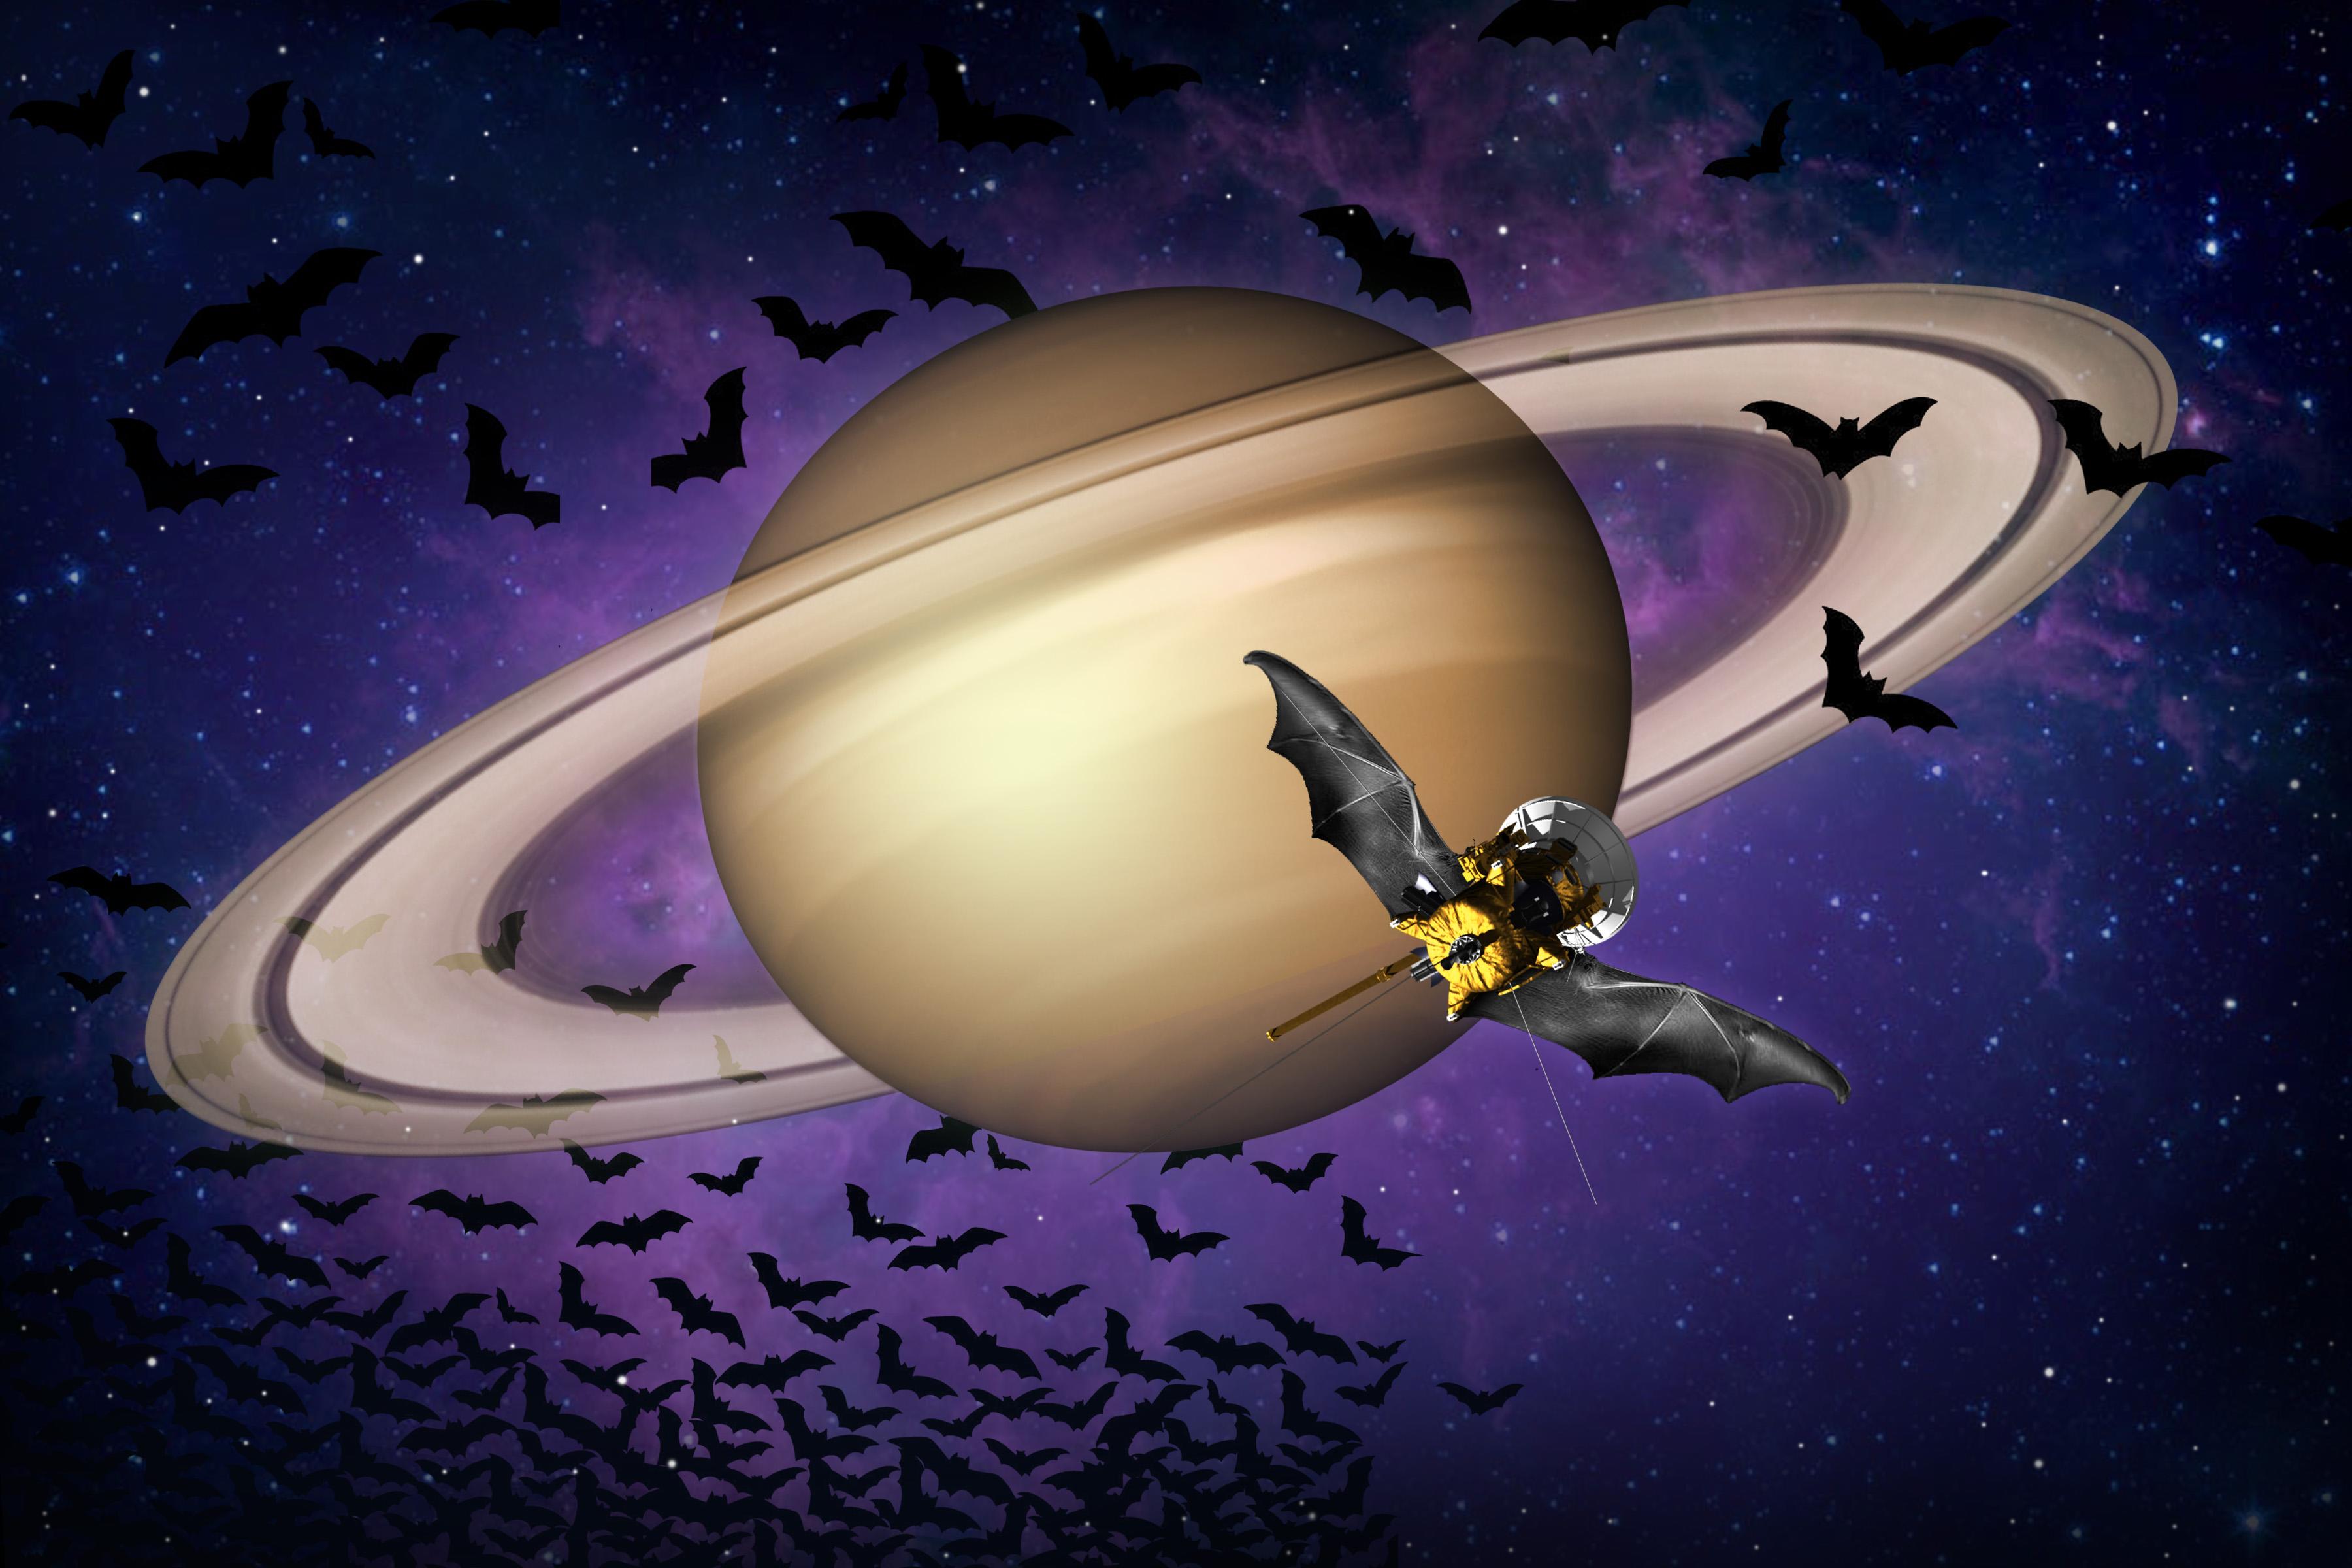 The Cassini spacecraft is dressed up like a bat for Halloween. Happy Halloween!